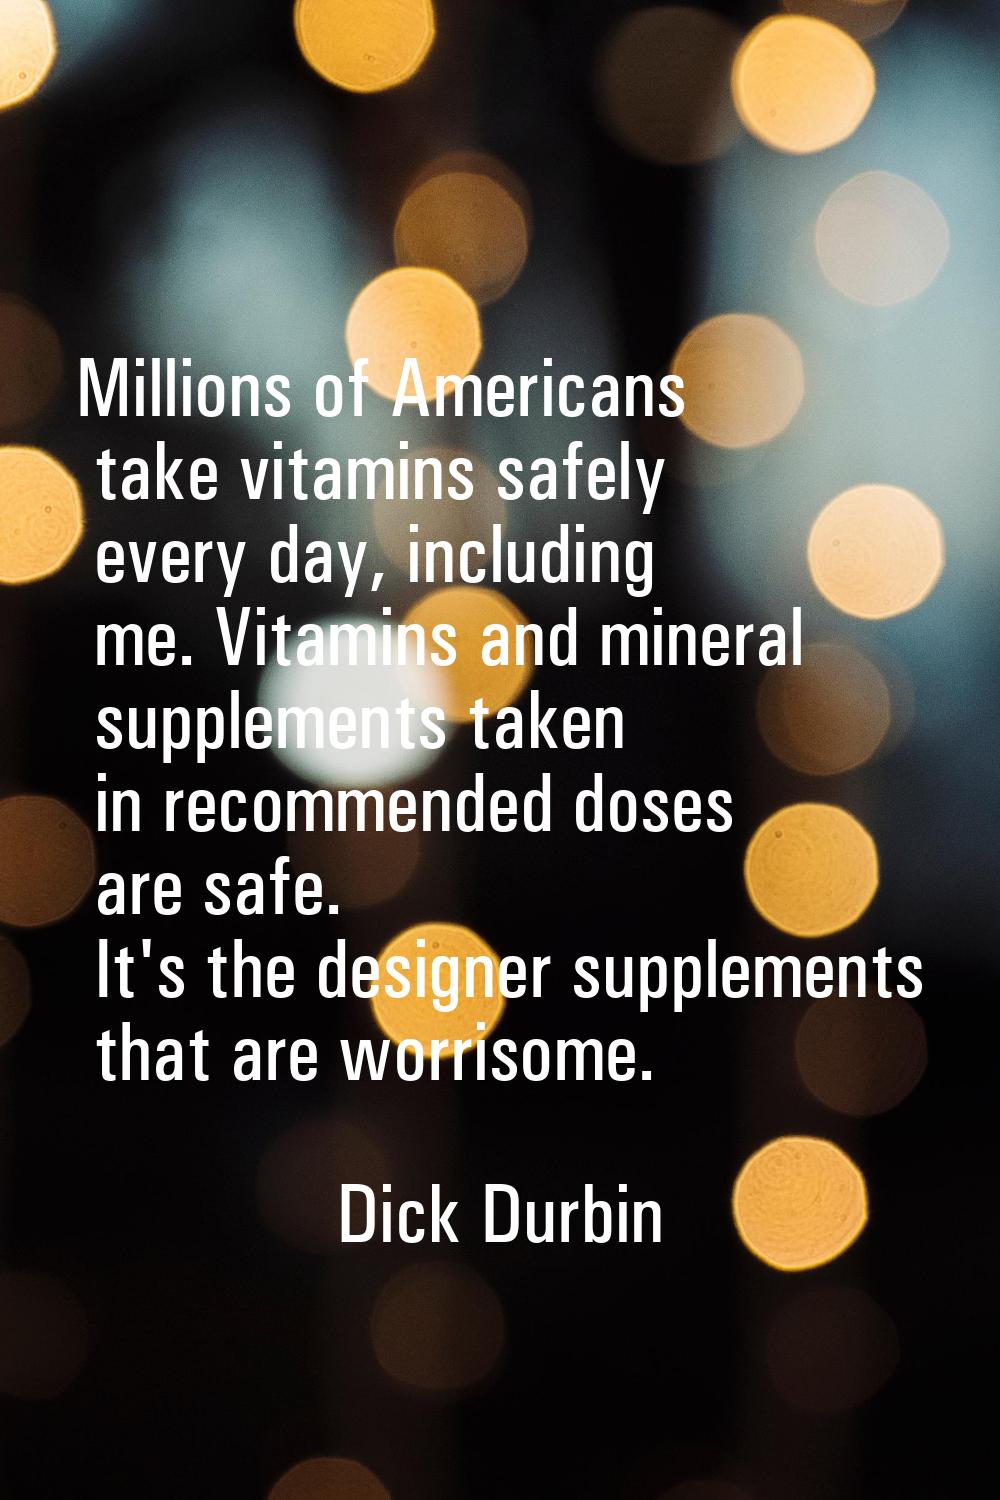 Millions of Americans take vitamins safely every day, including me. Vitamins and mineral supplement